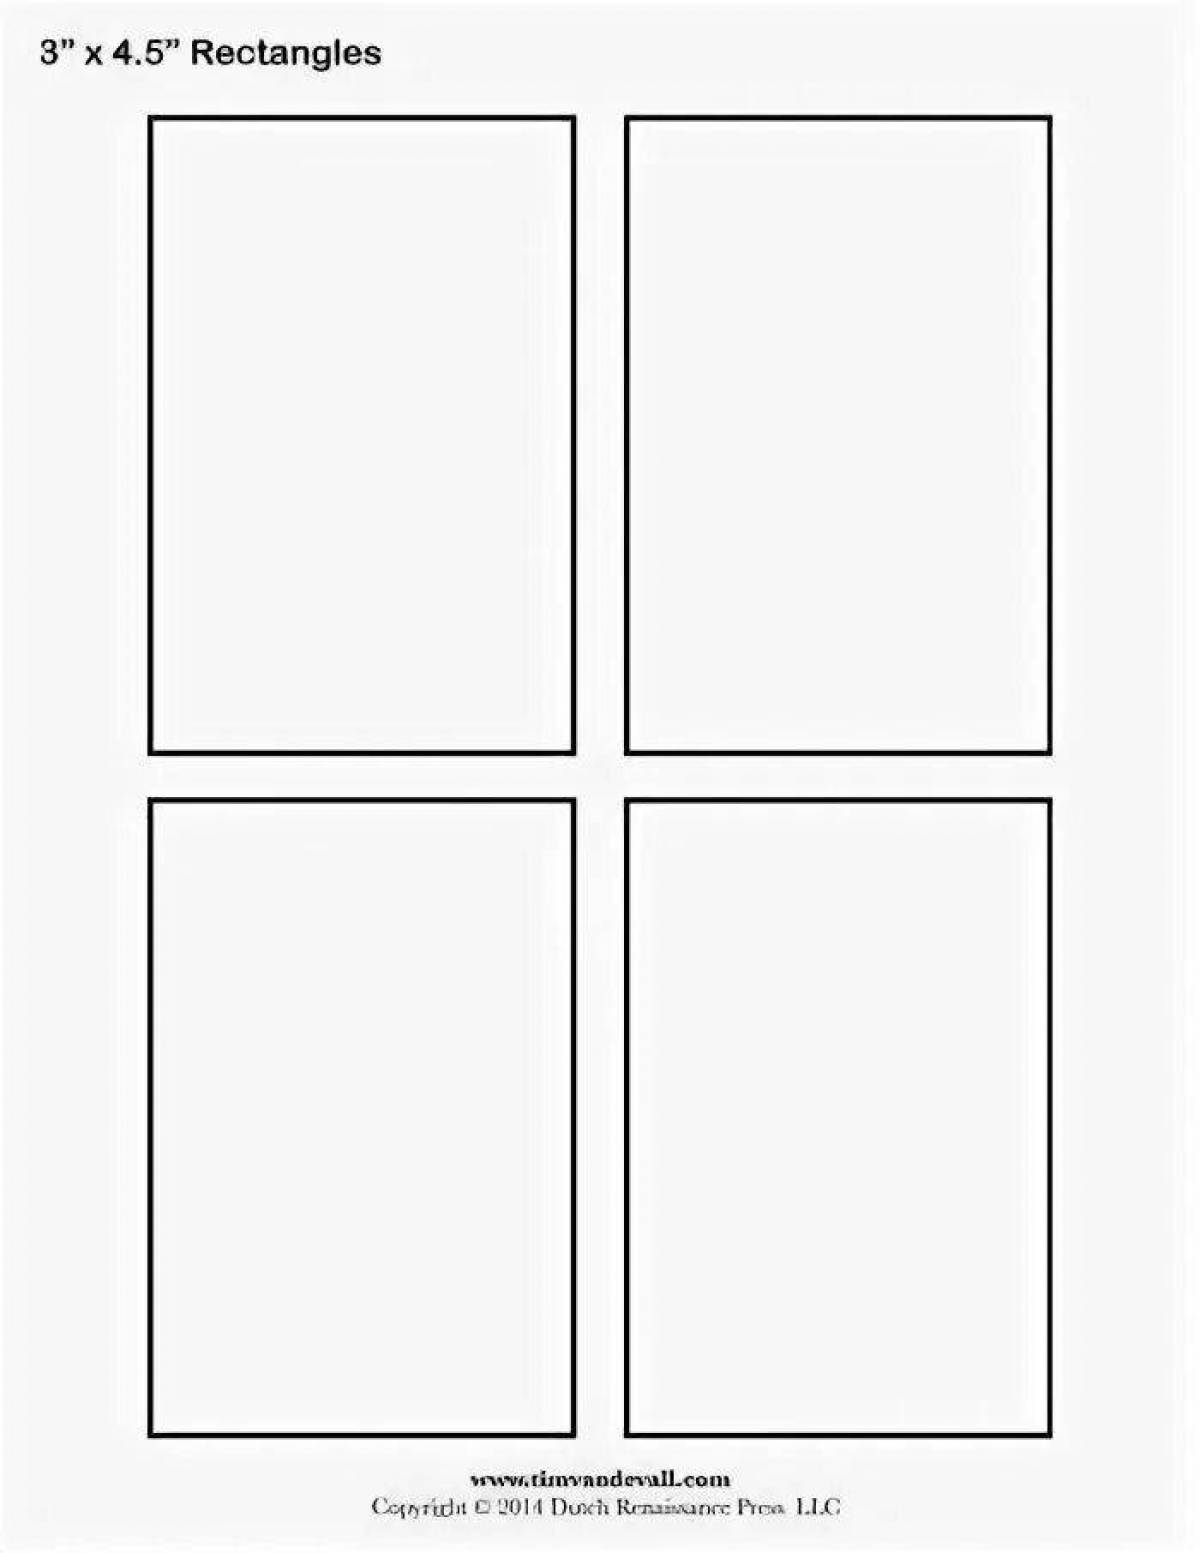 Large rectangle coloring page